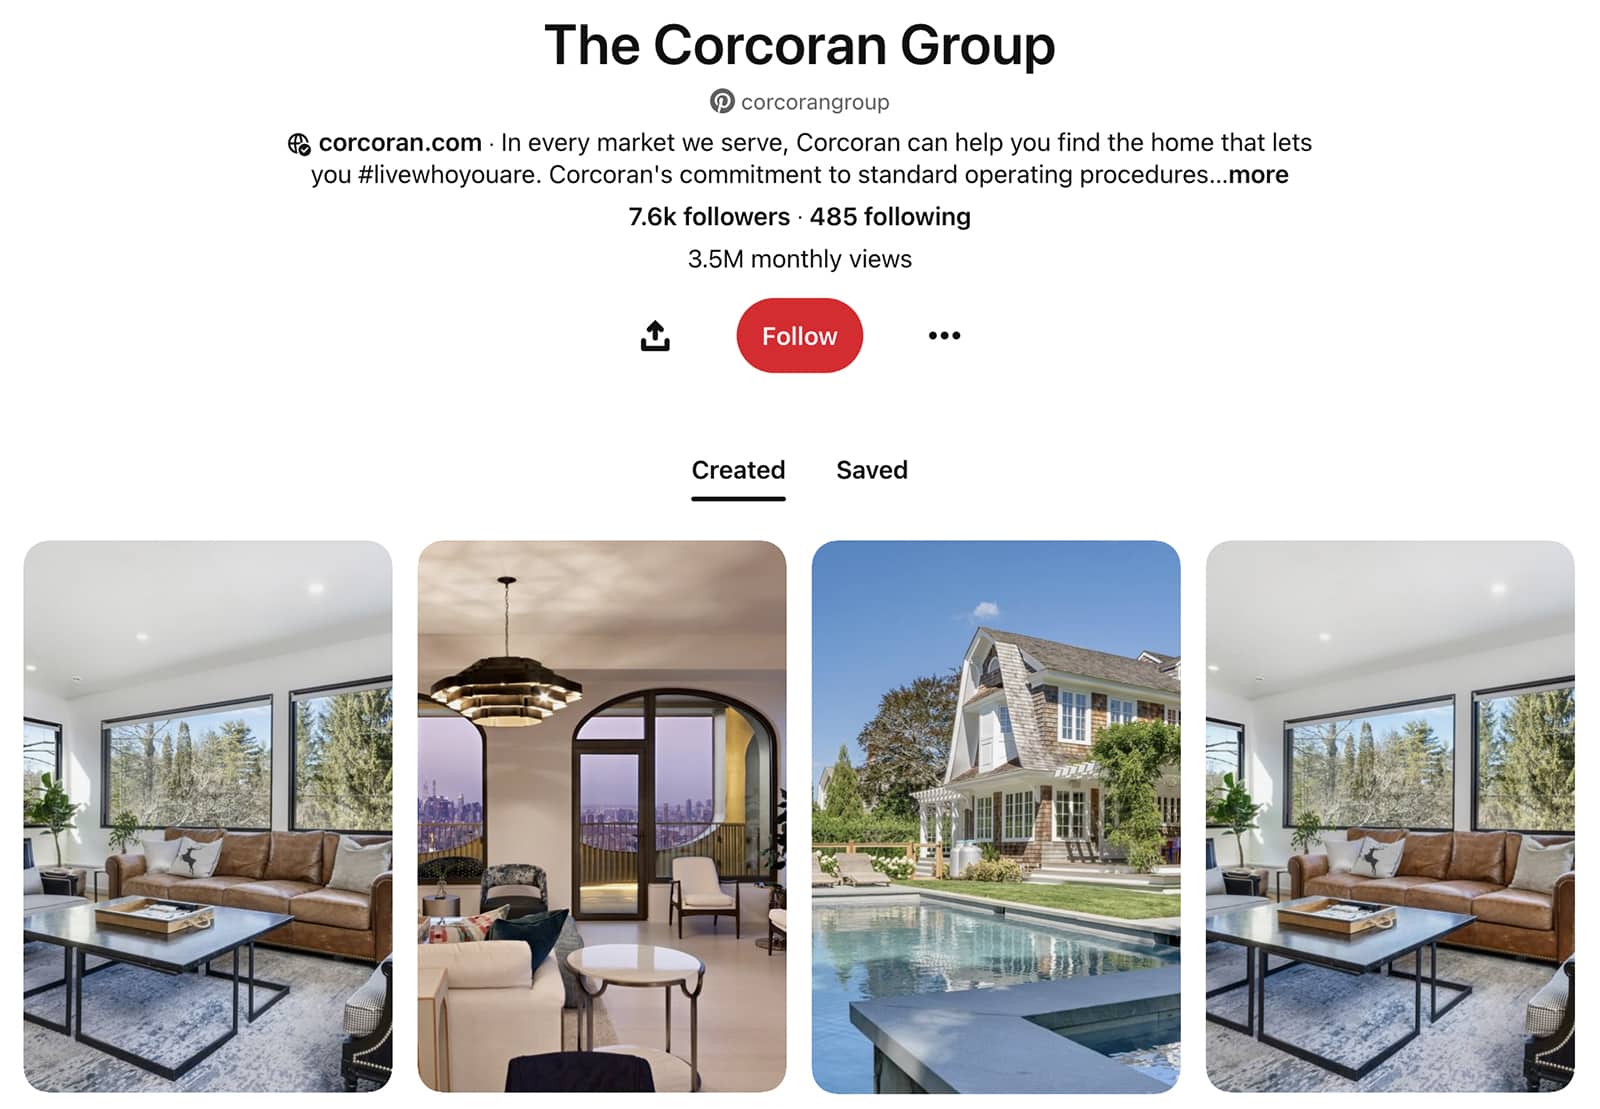 Pinterest real estate example - The Corcoran Group